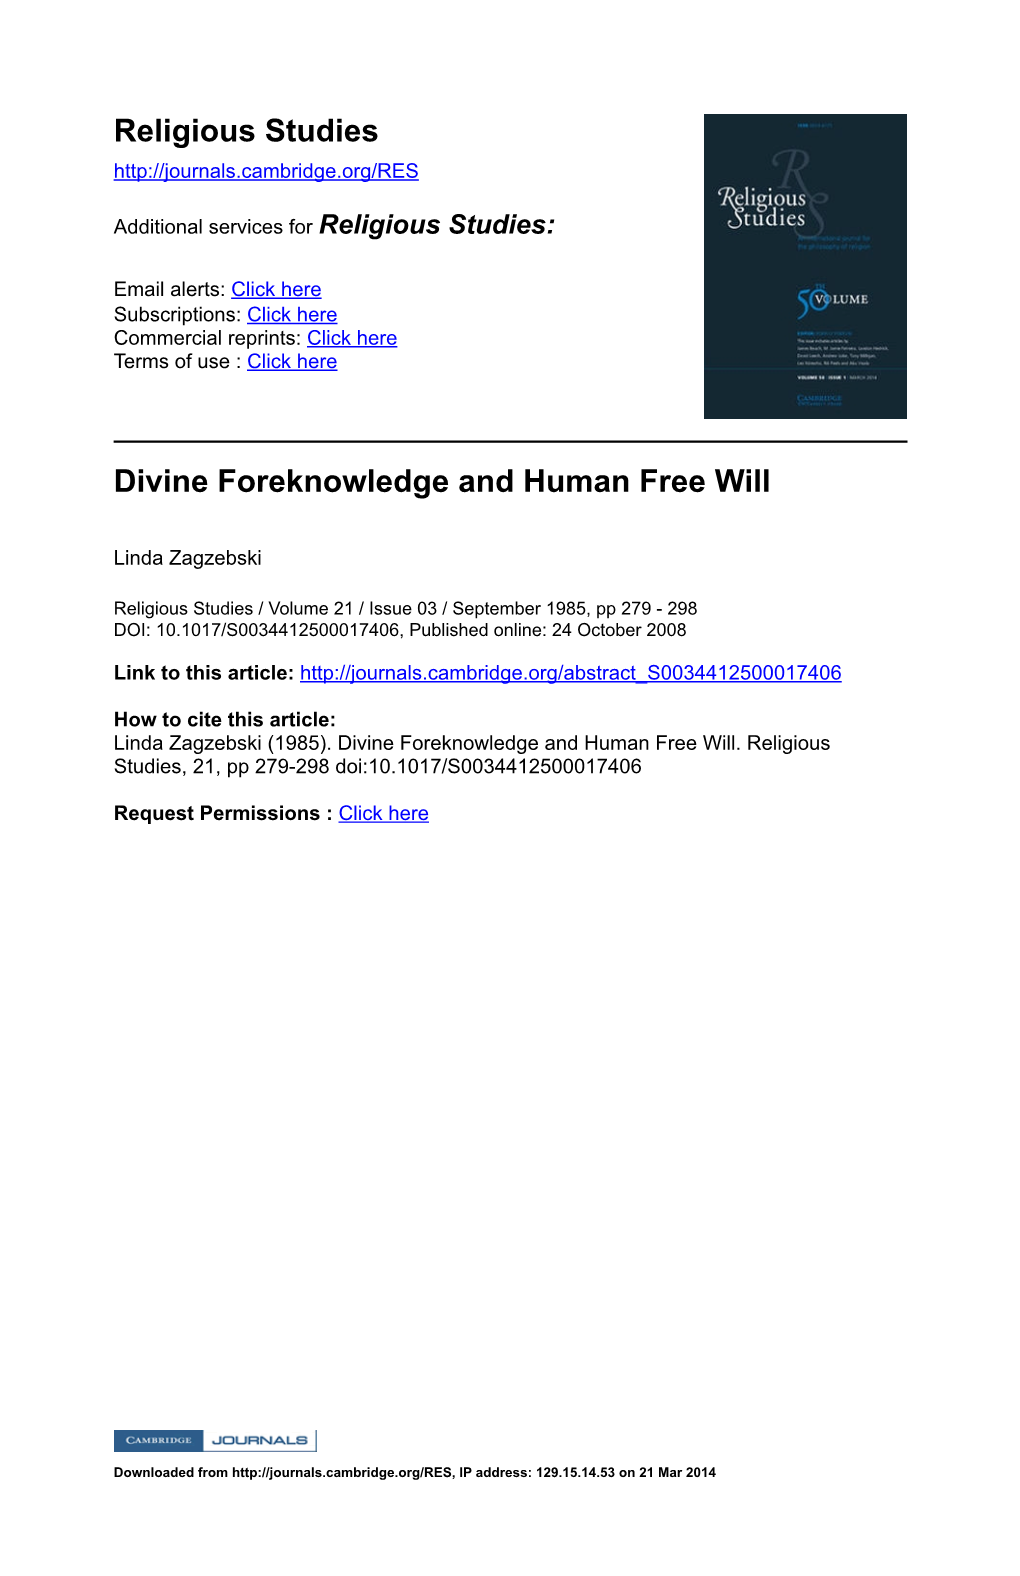 Divine Foreknowledge and Human Free Will